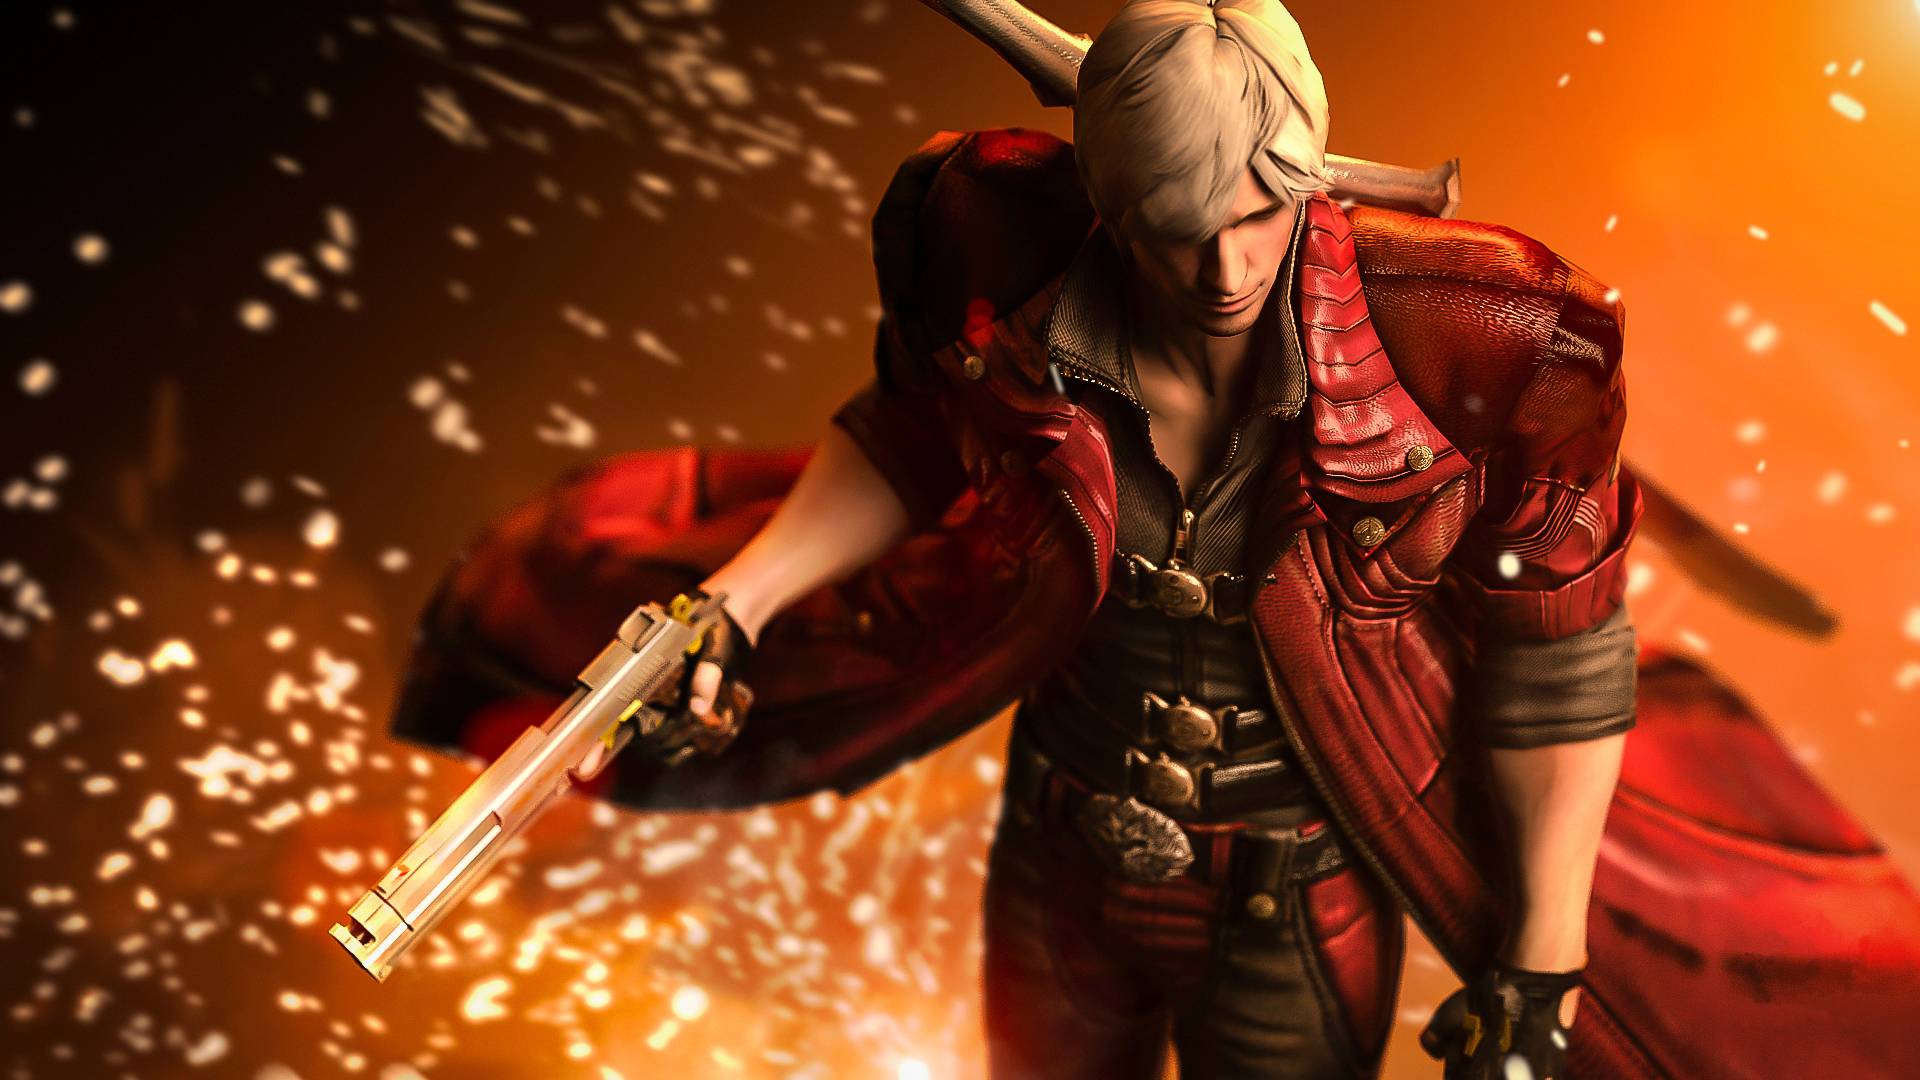 New Dante Devil May Cry Wallpaper HD For Desktop Background